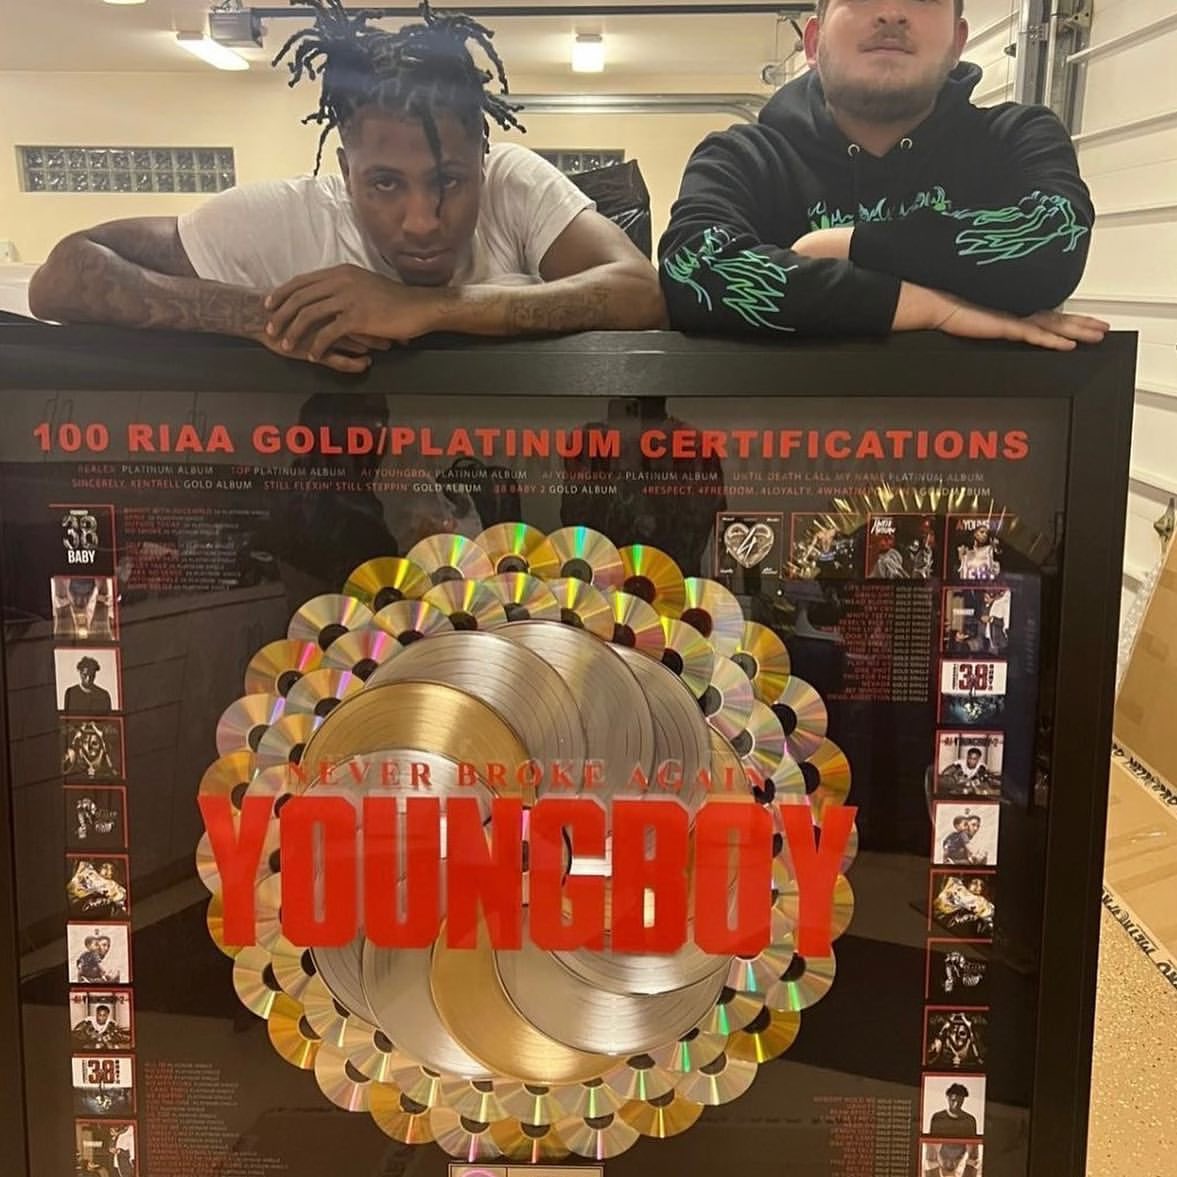 nba youngboy having 100 plaque at 22 isn’t talked bout enough